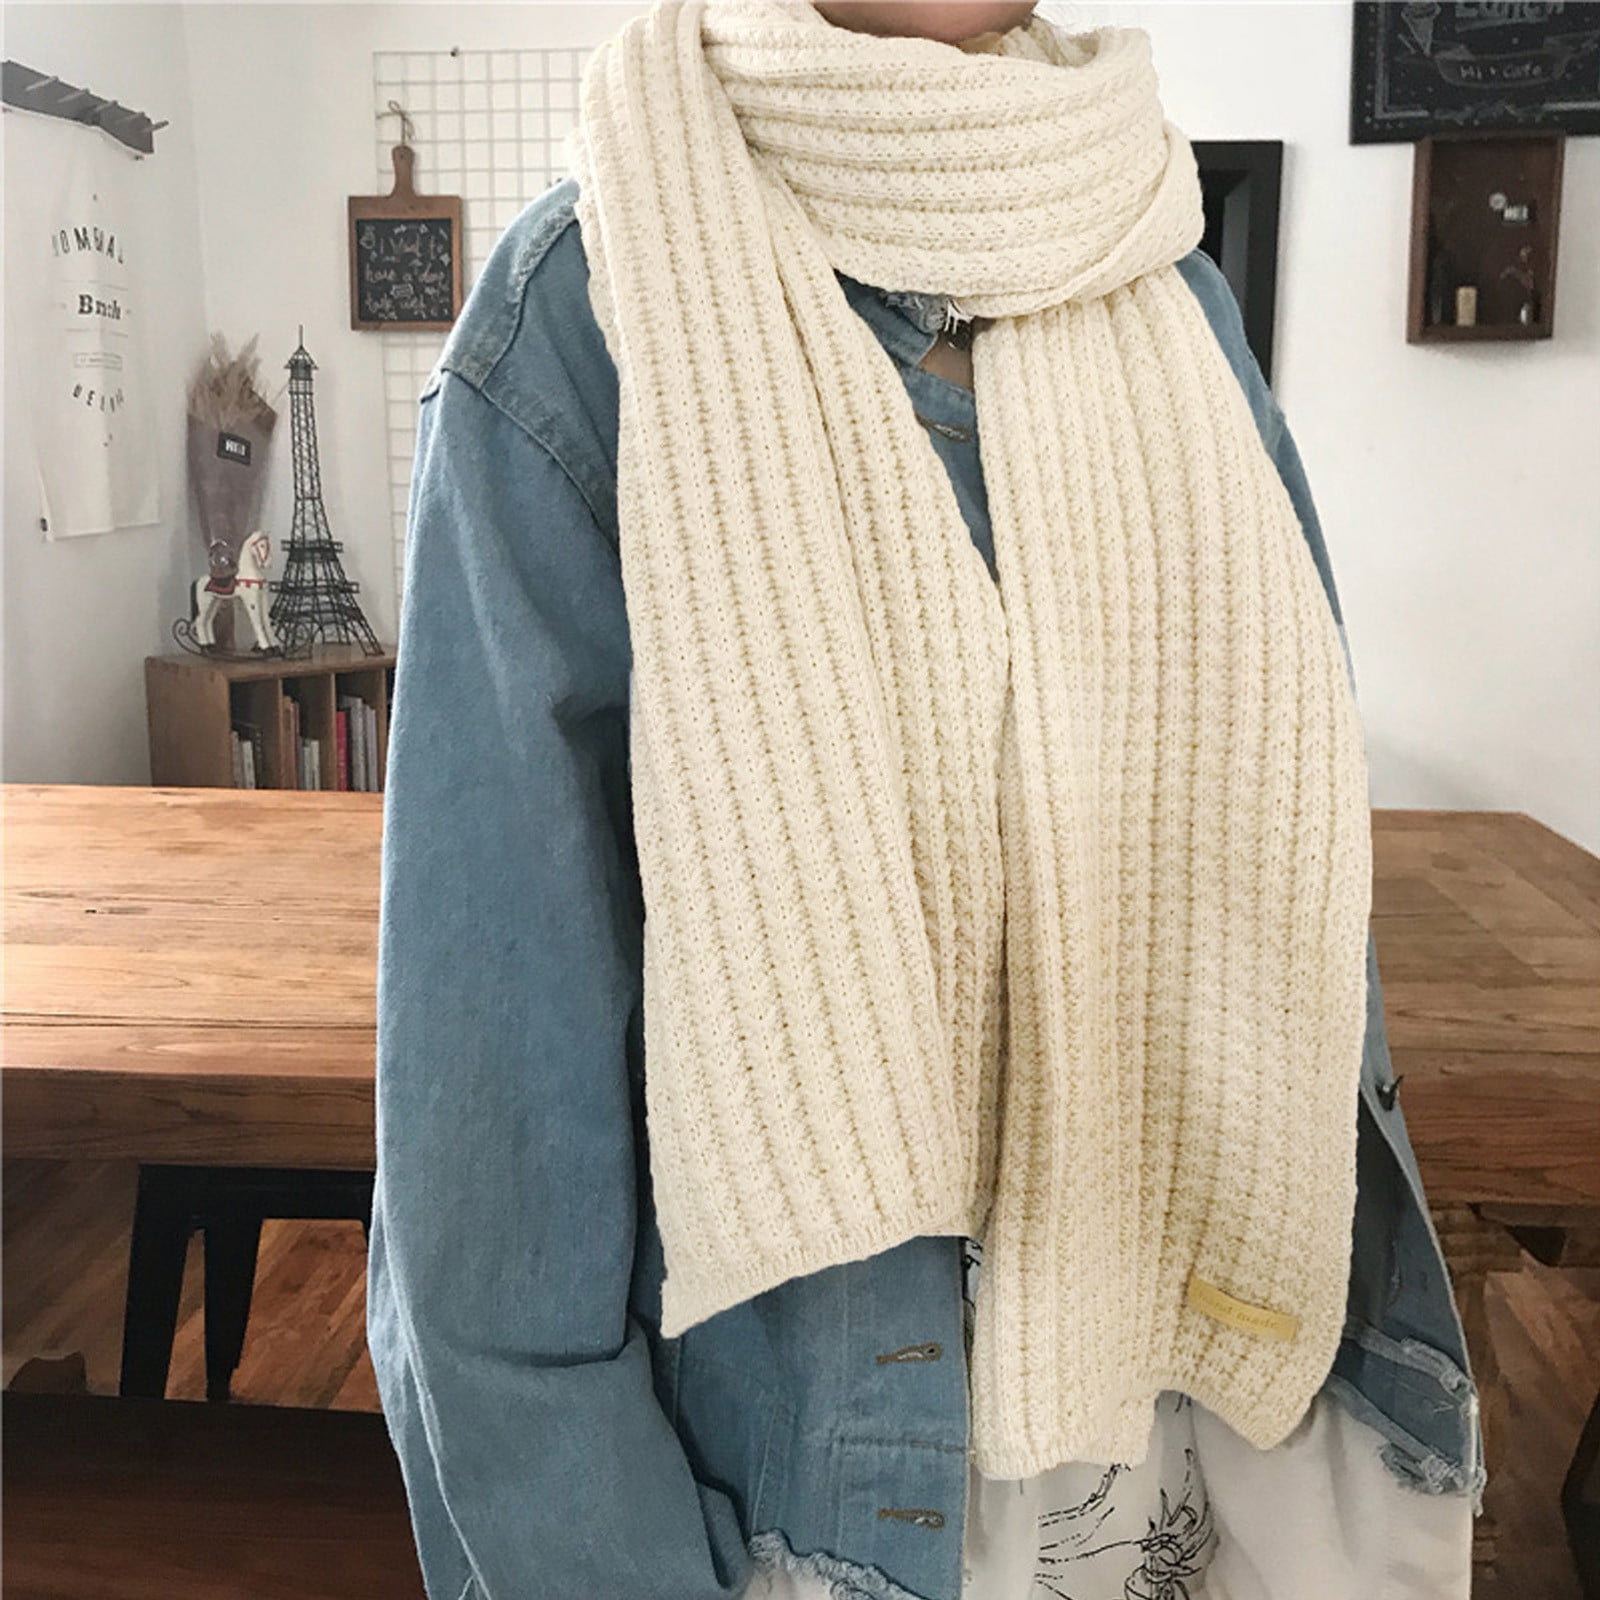 Winter Styling Tips: Scarves